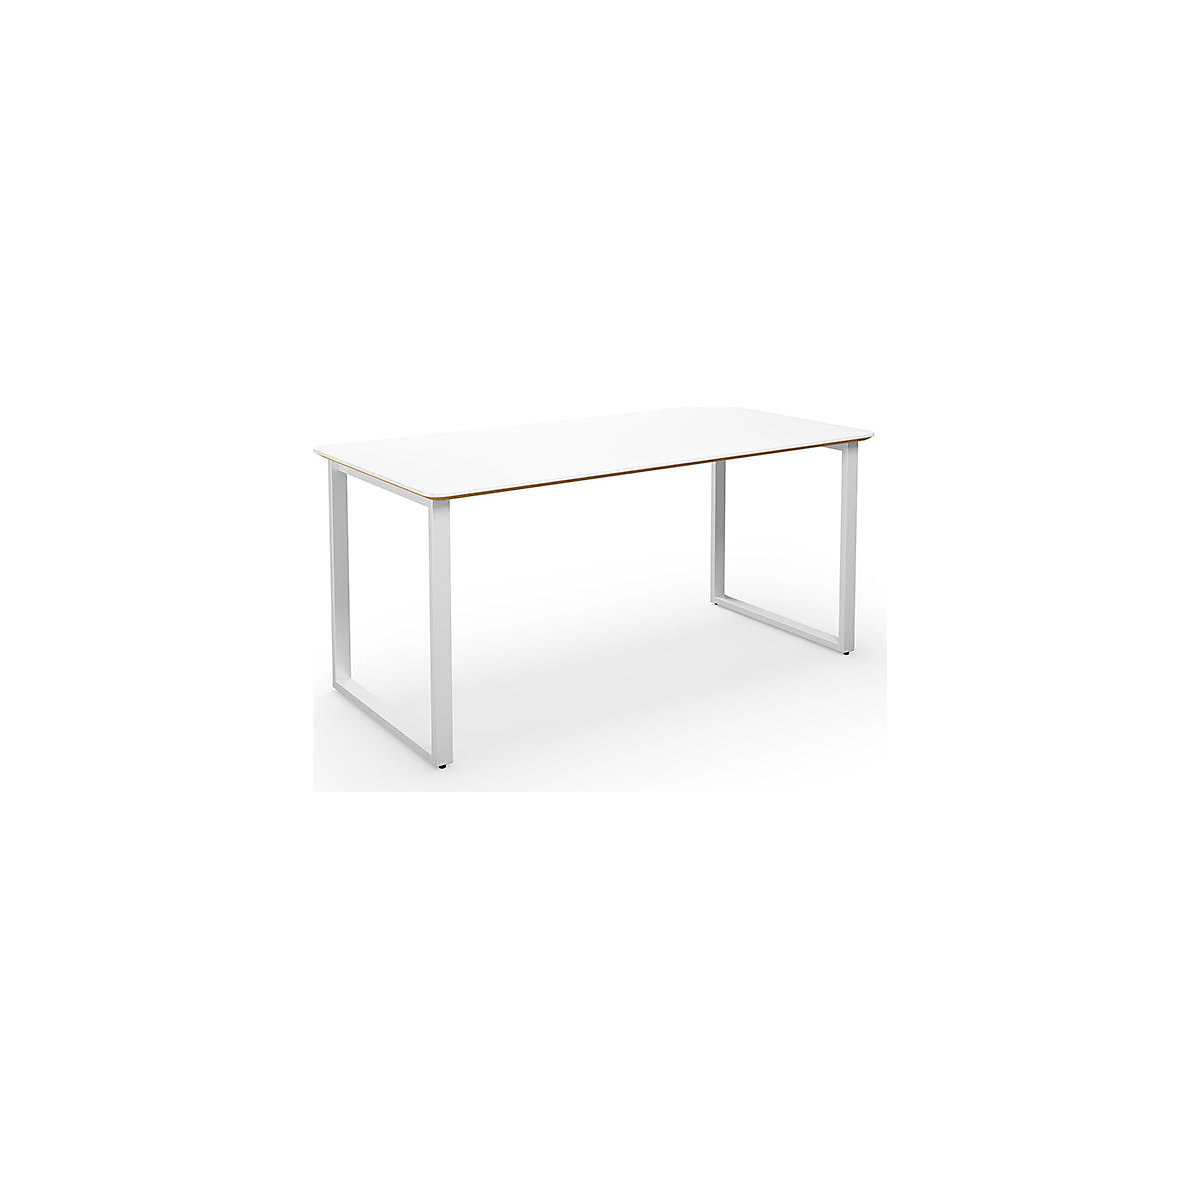 DUO-O Trend multi-purpose desk, straight tabletop, rounded corners, WxD 1400 x 800 mm, white, white-2